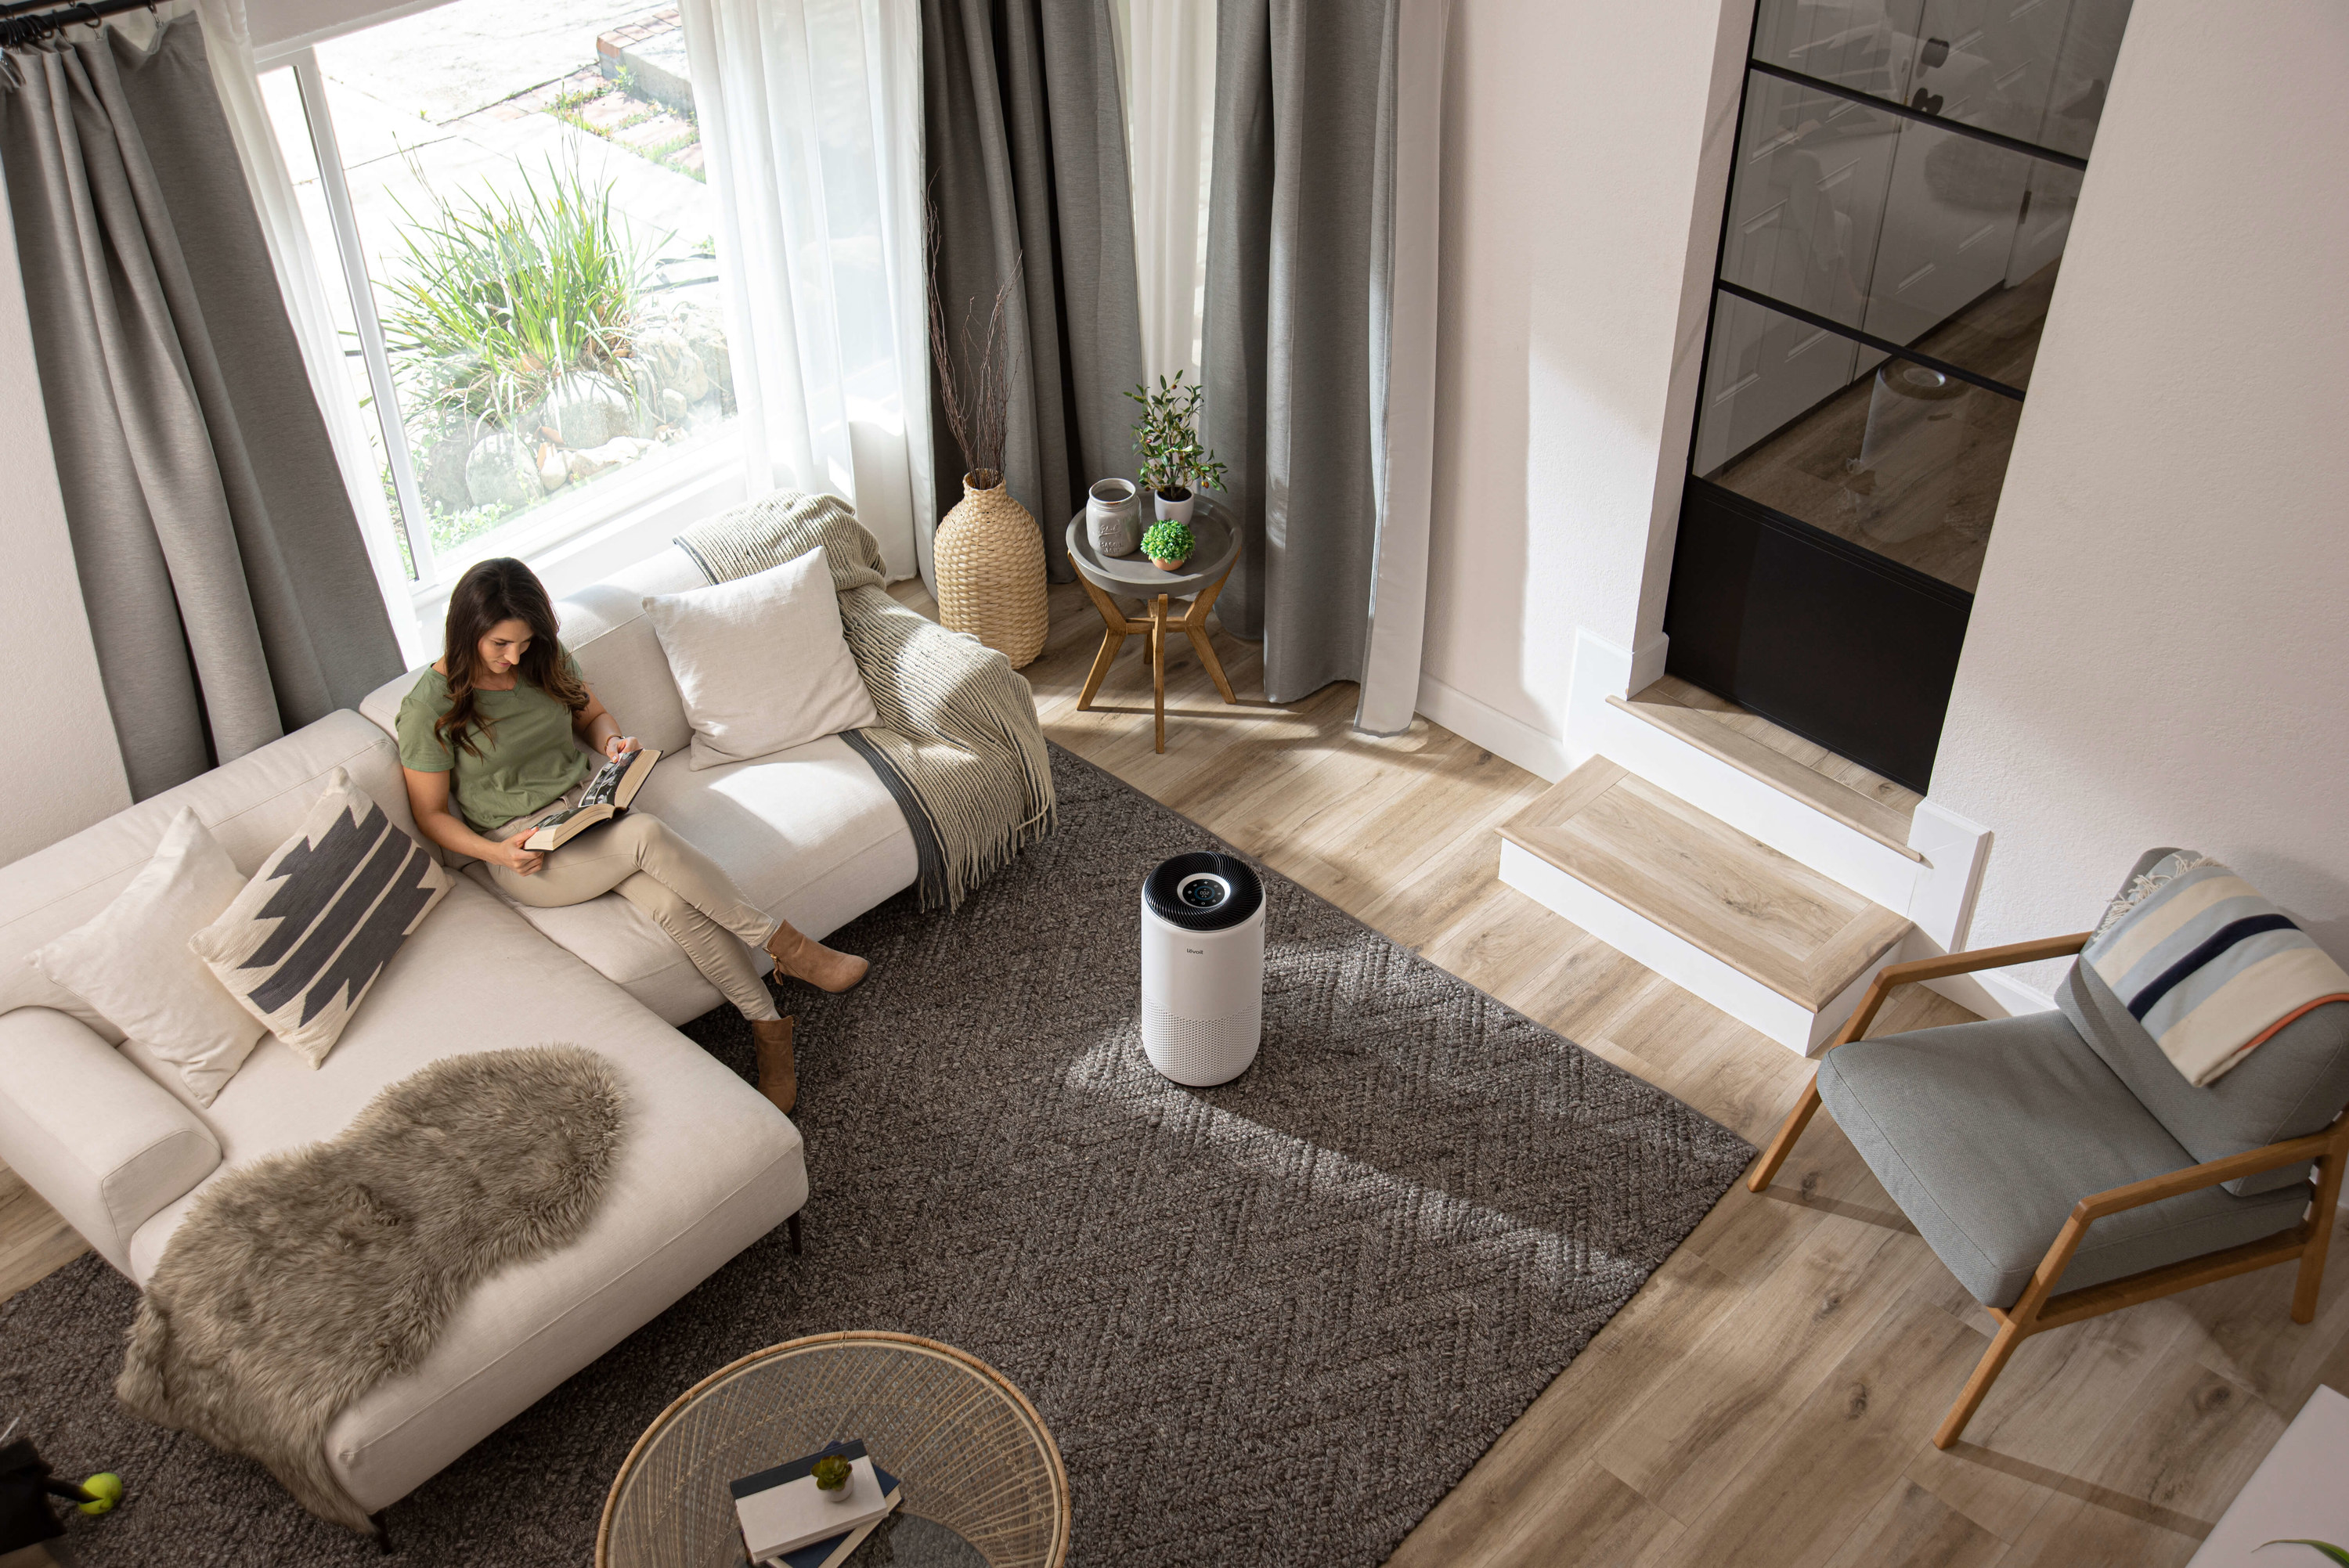 woman sitting on couch while air purifier cleans the air in the room